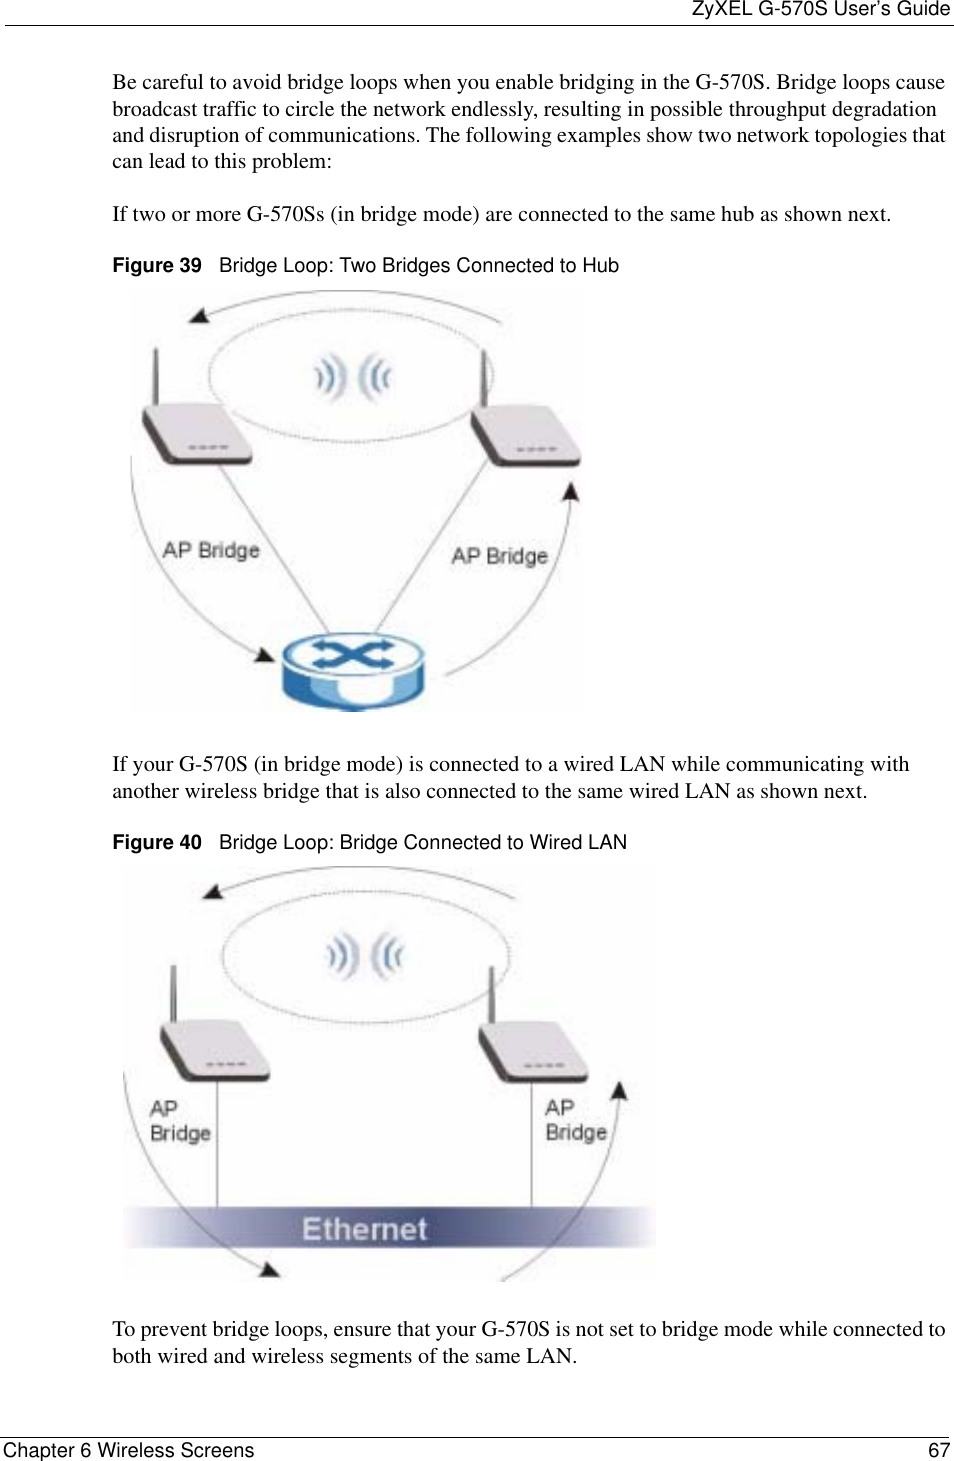 ZyXEL G-570S User’s GuideChapter 6 Wireless Screens 67Be careful to avoid bridge loops when you enable bridging in the G-570S. Bridge loops cause broadcast traffic to circle the network endlessly, resulting in possible throughput degradation and disruption of communications. The following examples show two network topologies that can lead to this problem: If two or more G-570Ss (in bridge mode) are connected to the same hub as shown next.Figure 39   Bridge Loop: Two Bridges Connected to HubIf your G-570S (in bridge mode) is connected to a wired LAN while communicating with another wireless bridge that is also connected to the same wired LAN as shown next.Figure 40   Bridge Loop: Bridge Connected to Wired LANTo prevent bridge loops, ensure that your G-570S is not set to bridge mode while connected to both wired and wireless segments of the same LAN.